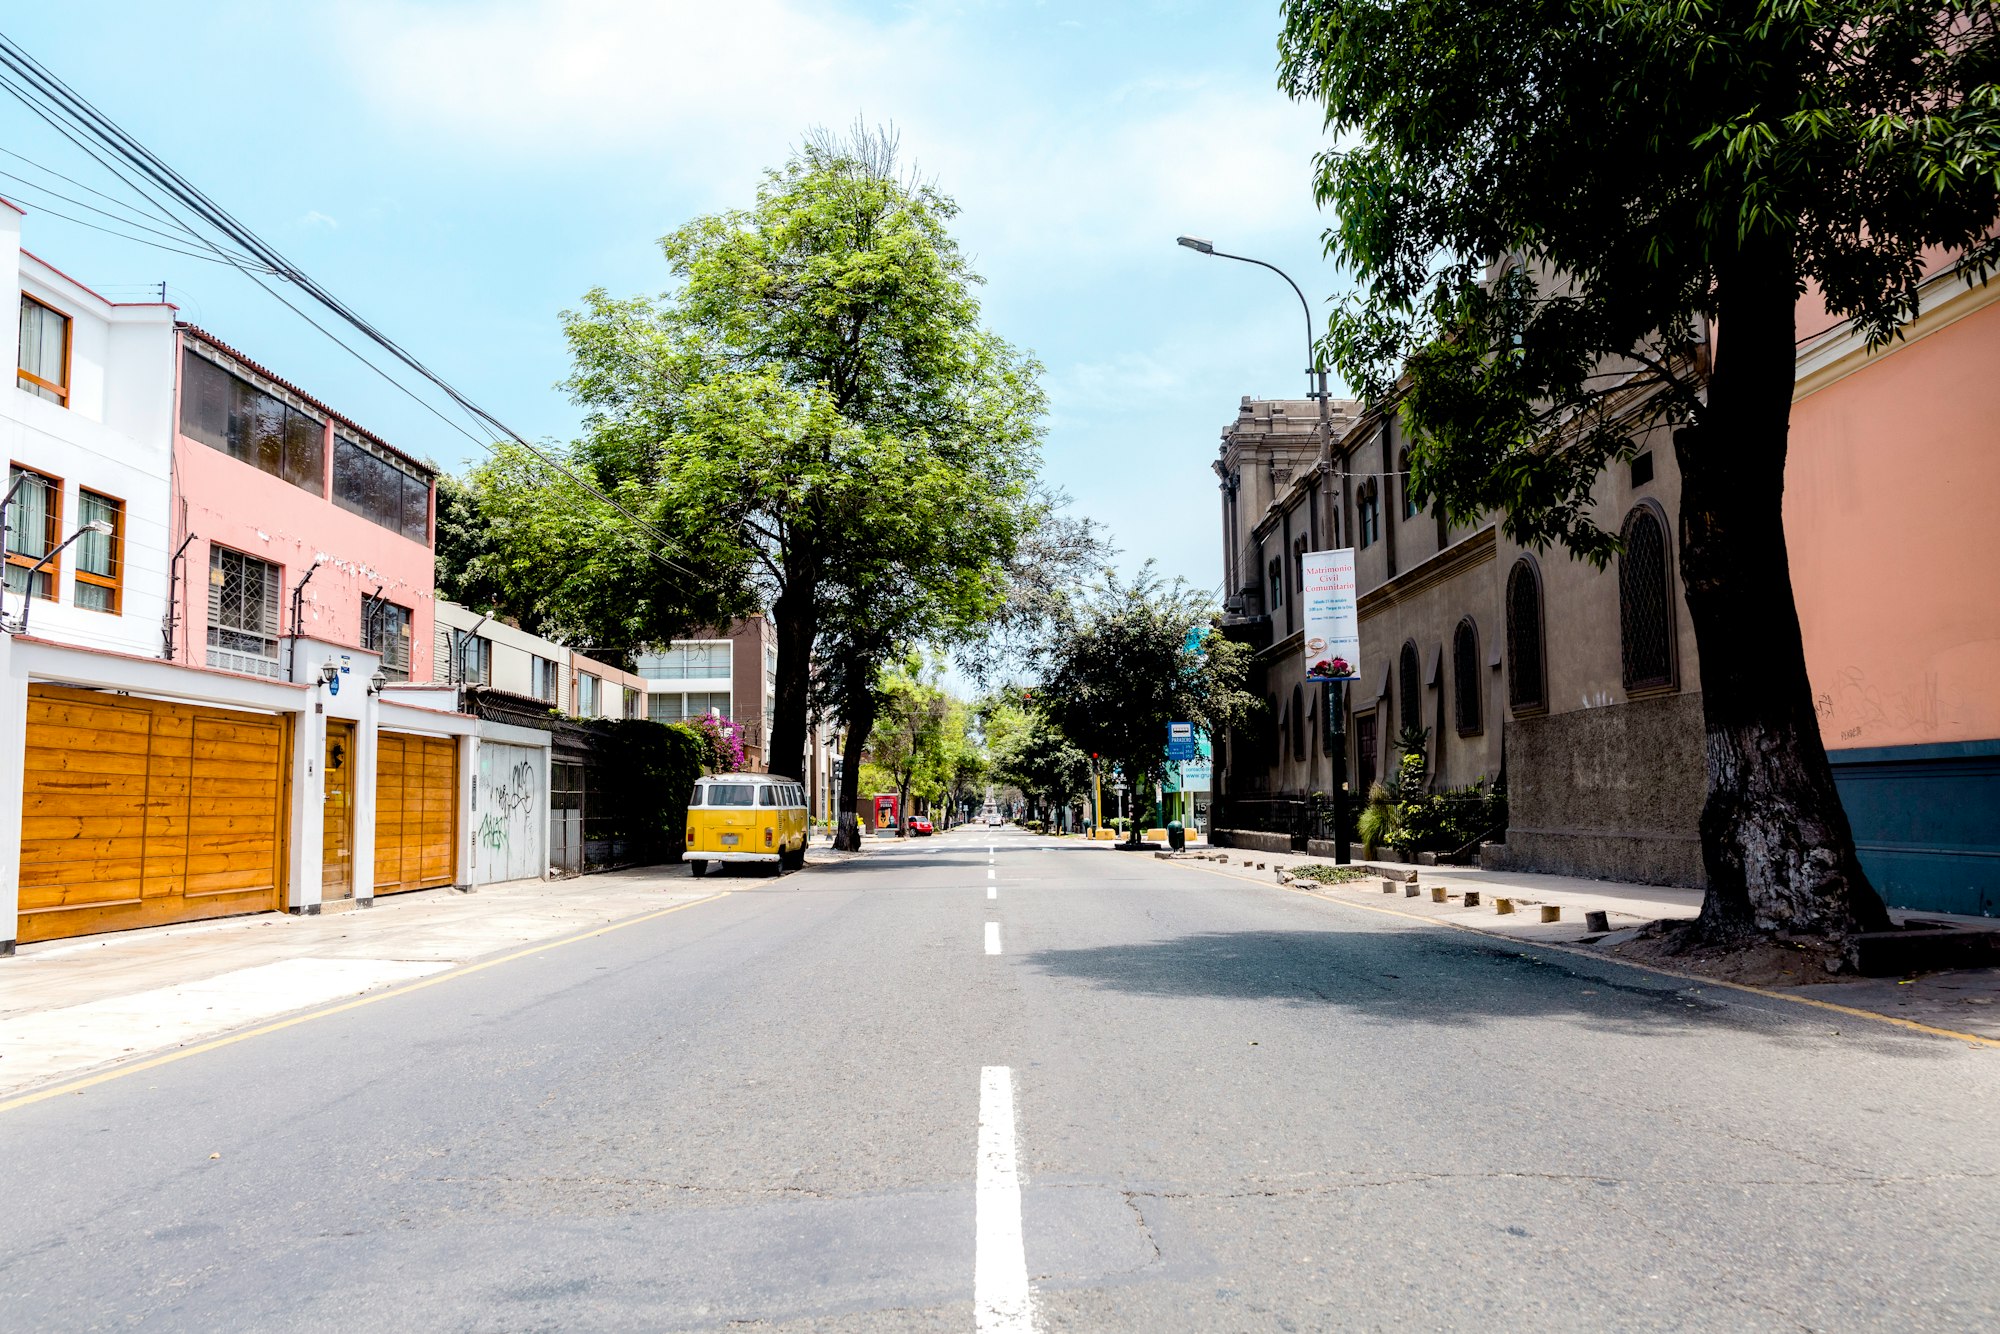 Sunday noon, while all people where participating on the national census, streets look empty and abandoned like it was the first day people left. This is a shot of a hipster neighbourhood Barranco whit -almost- no humans around in the shot.